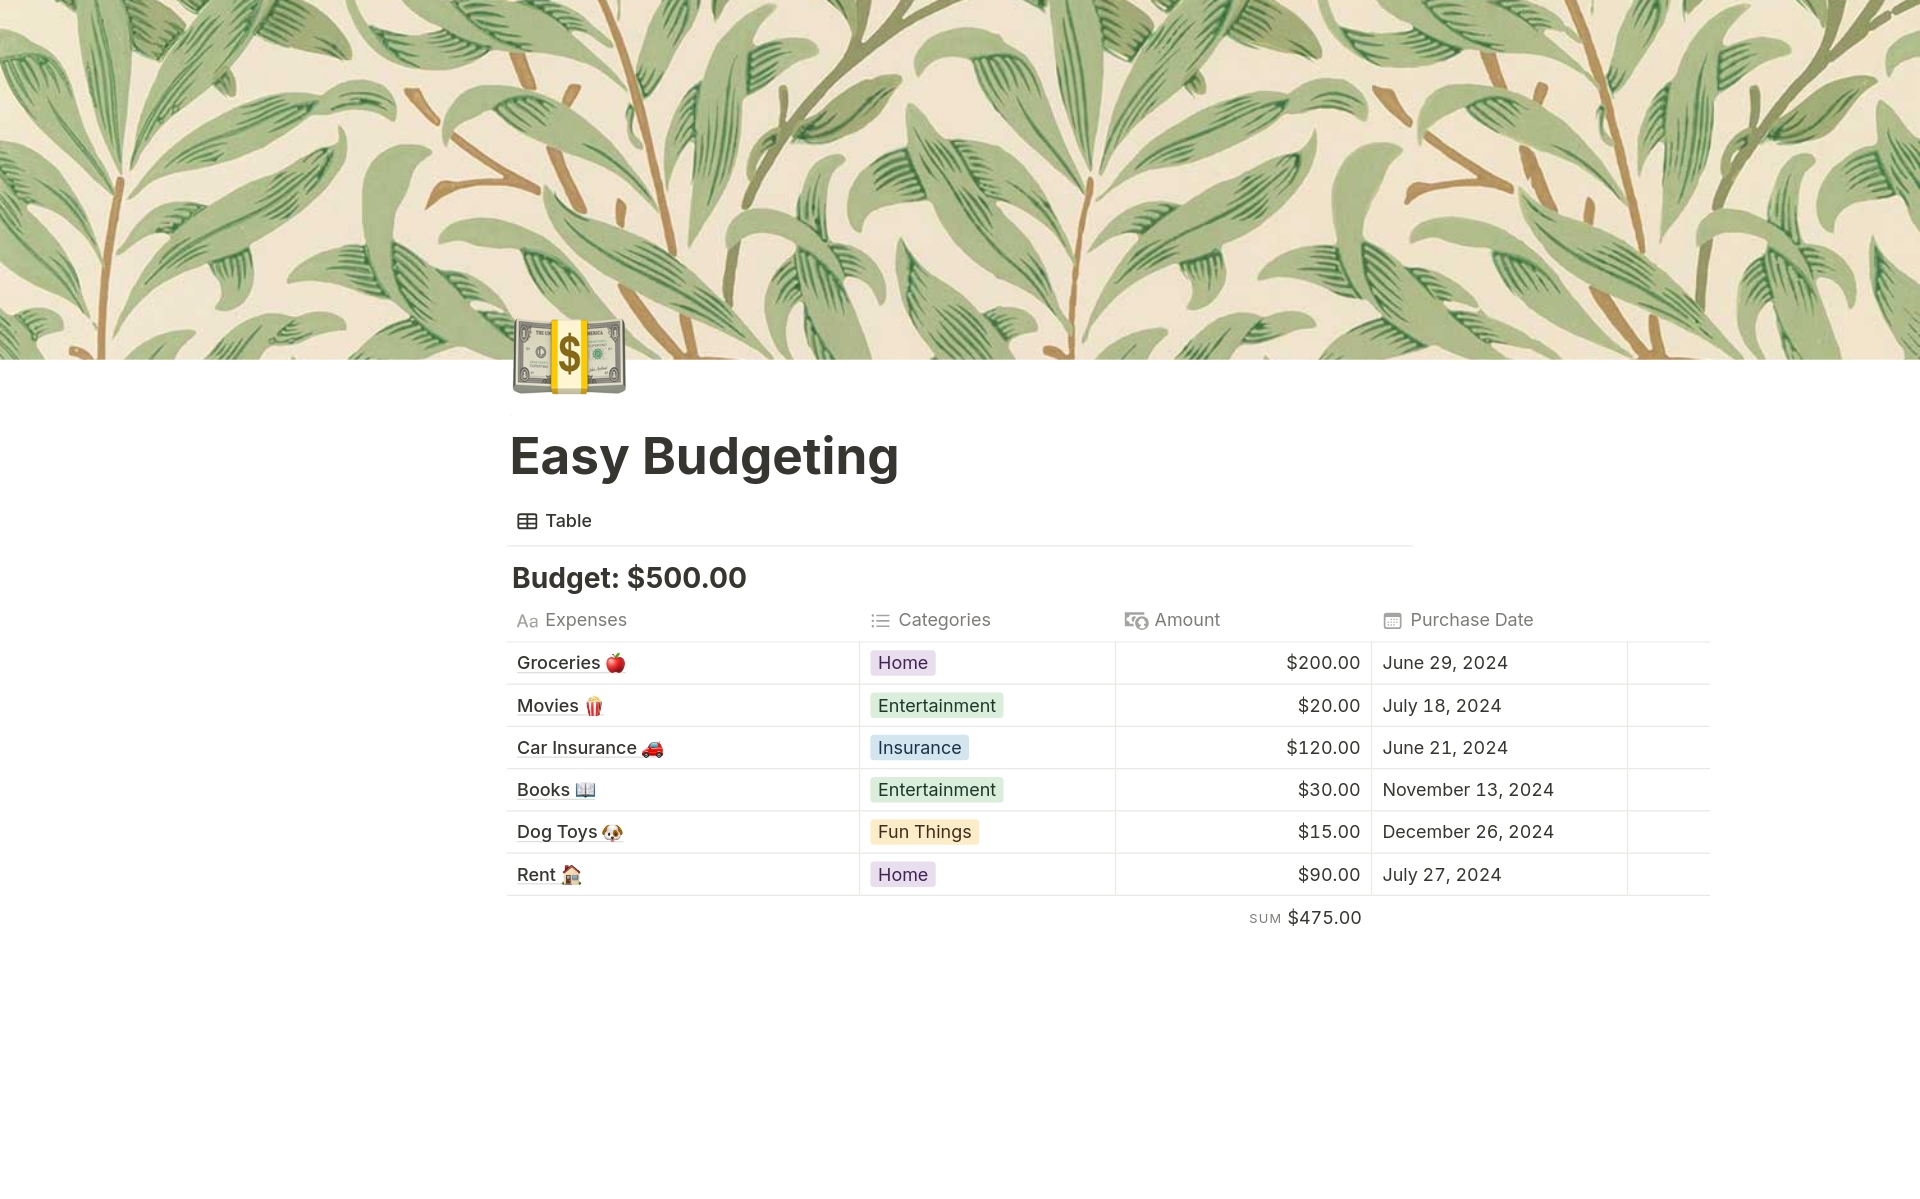 This chart makes budgeting a breeze!